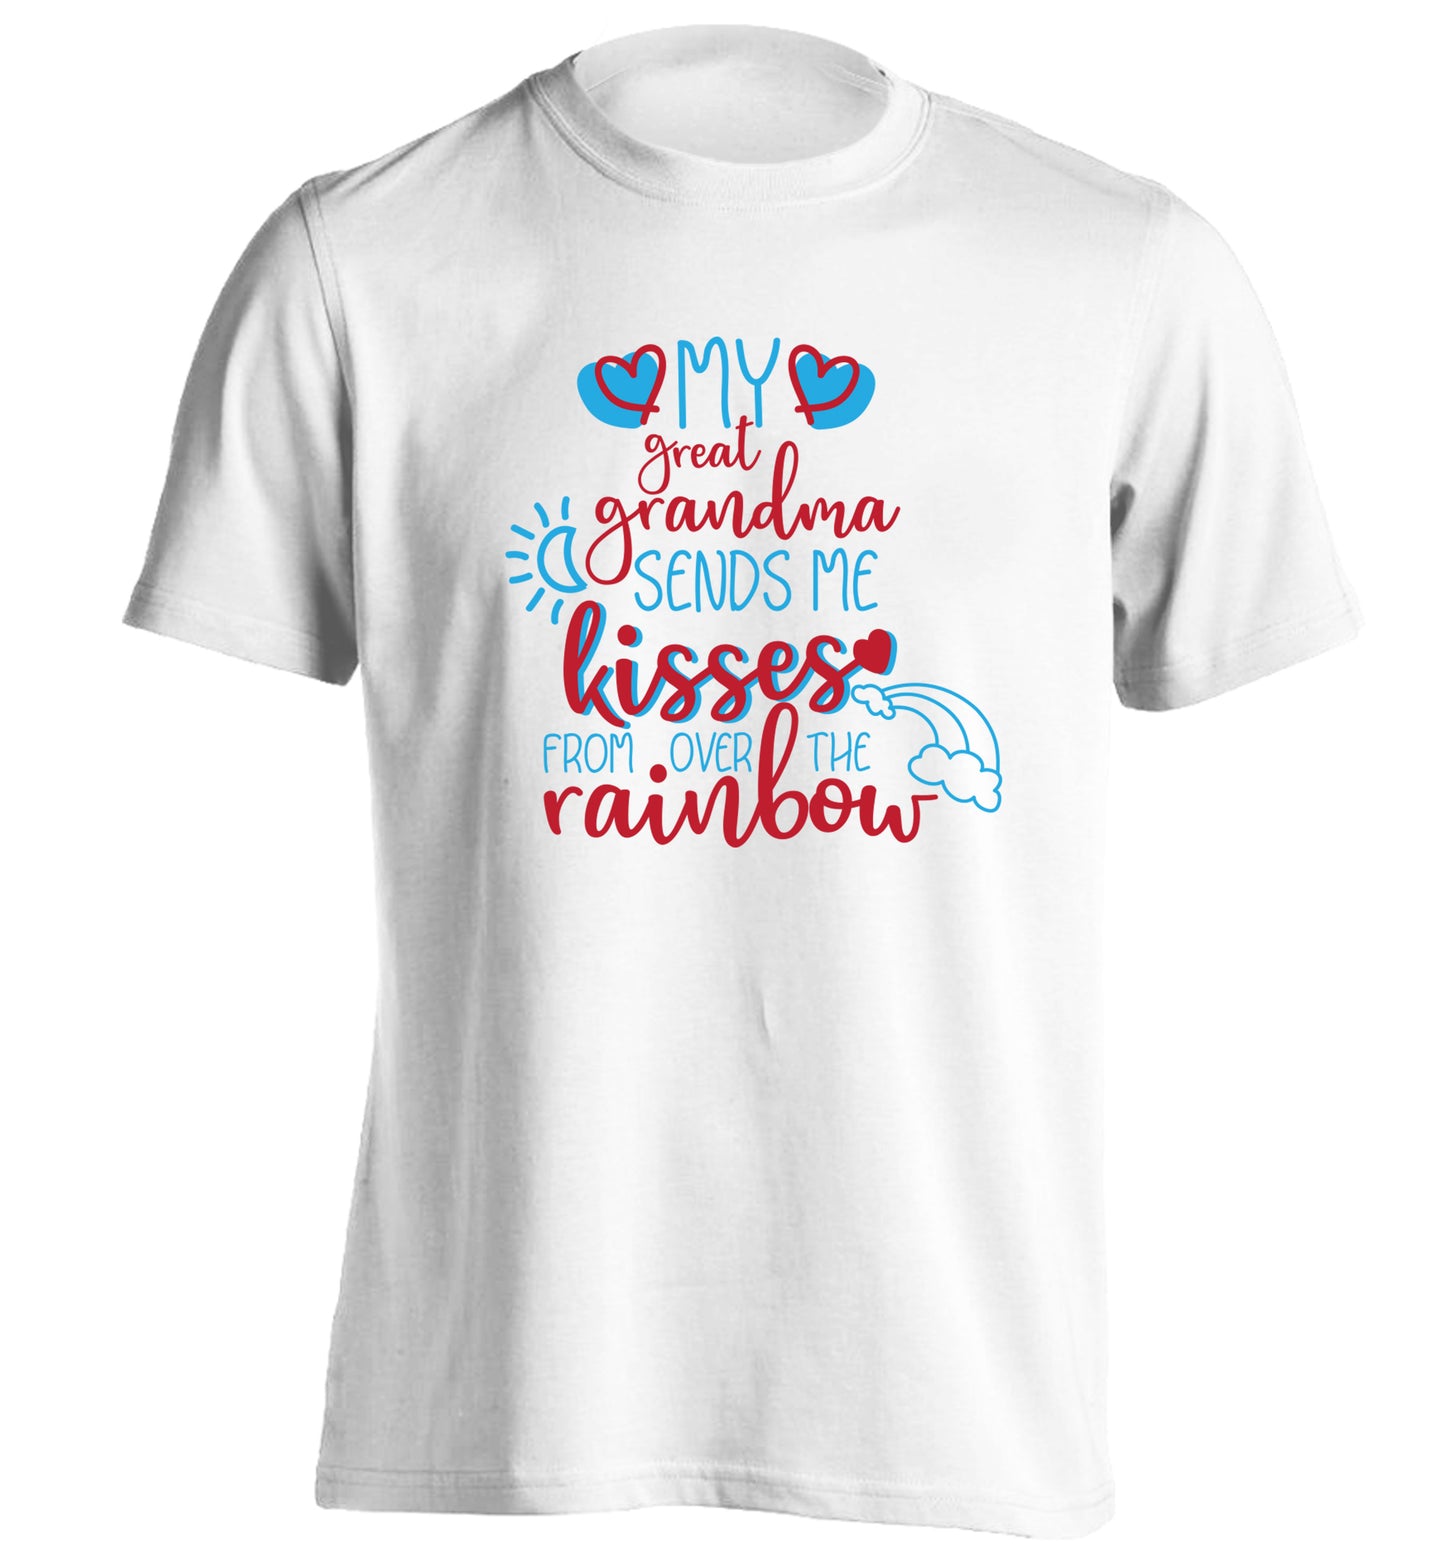 My great grandma sends me kisses from over the rainbow adults unisex white Tshirt 2XL